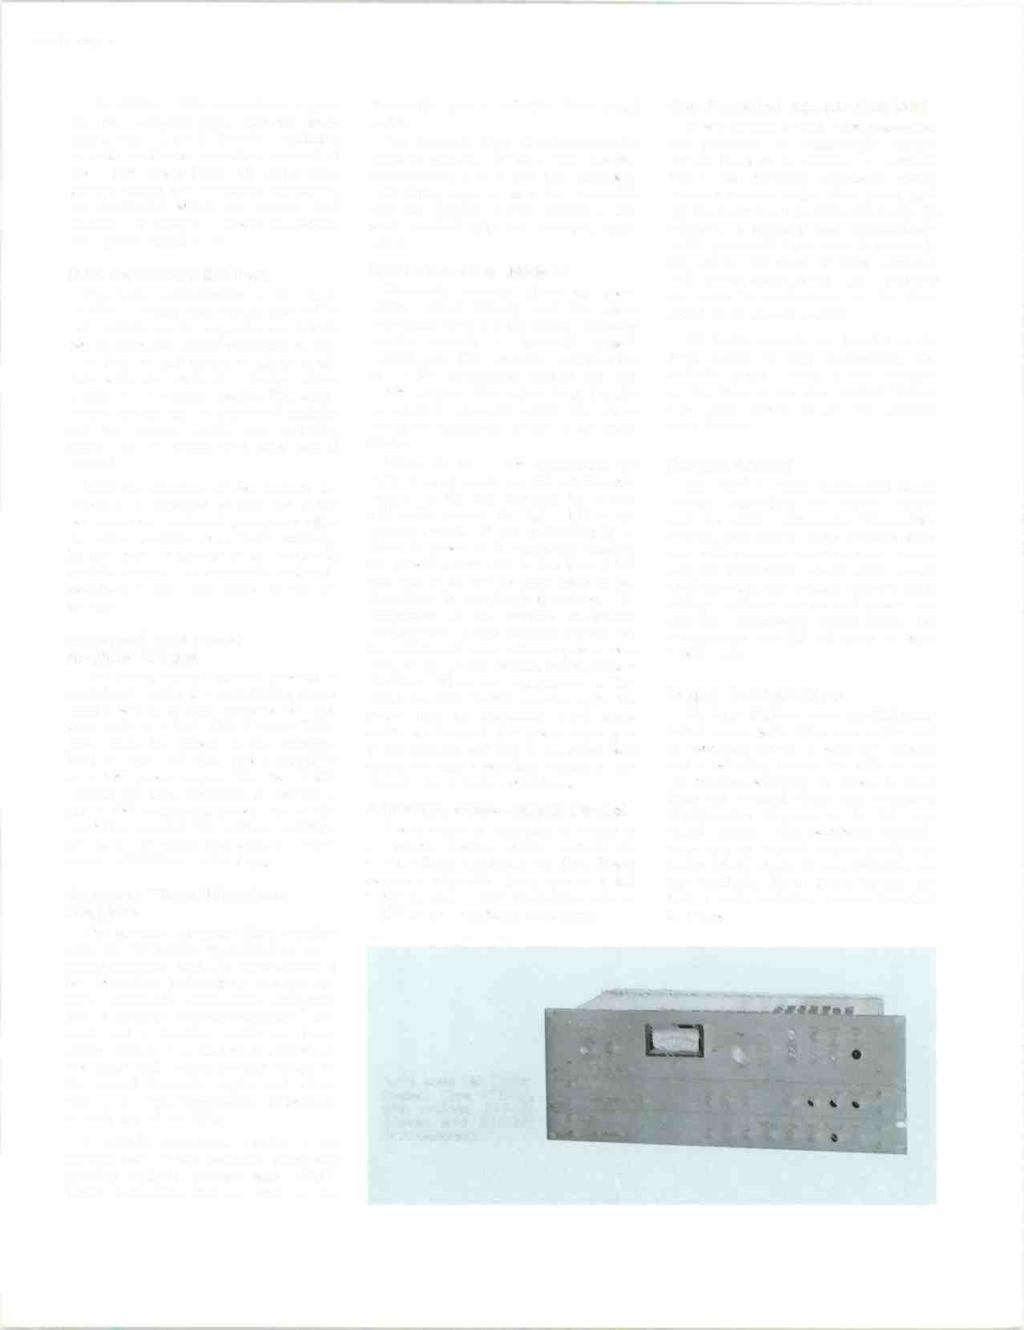 RA.2033 Page 2 The BTF-3+3ES1 transmitter is actually two complete three kilowatt transmitter units (Type BTF-3ES1) combined to make continuous operation practical at the 6 kw power level.